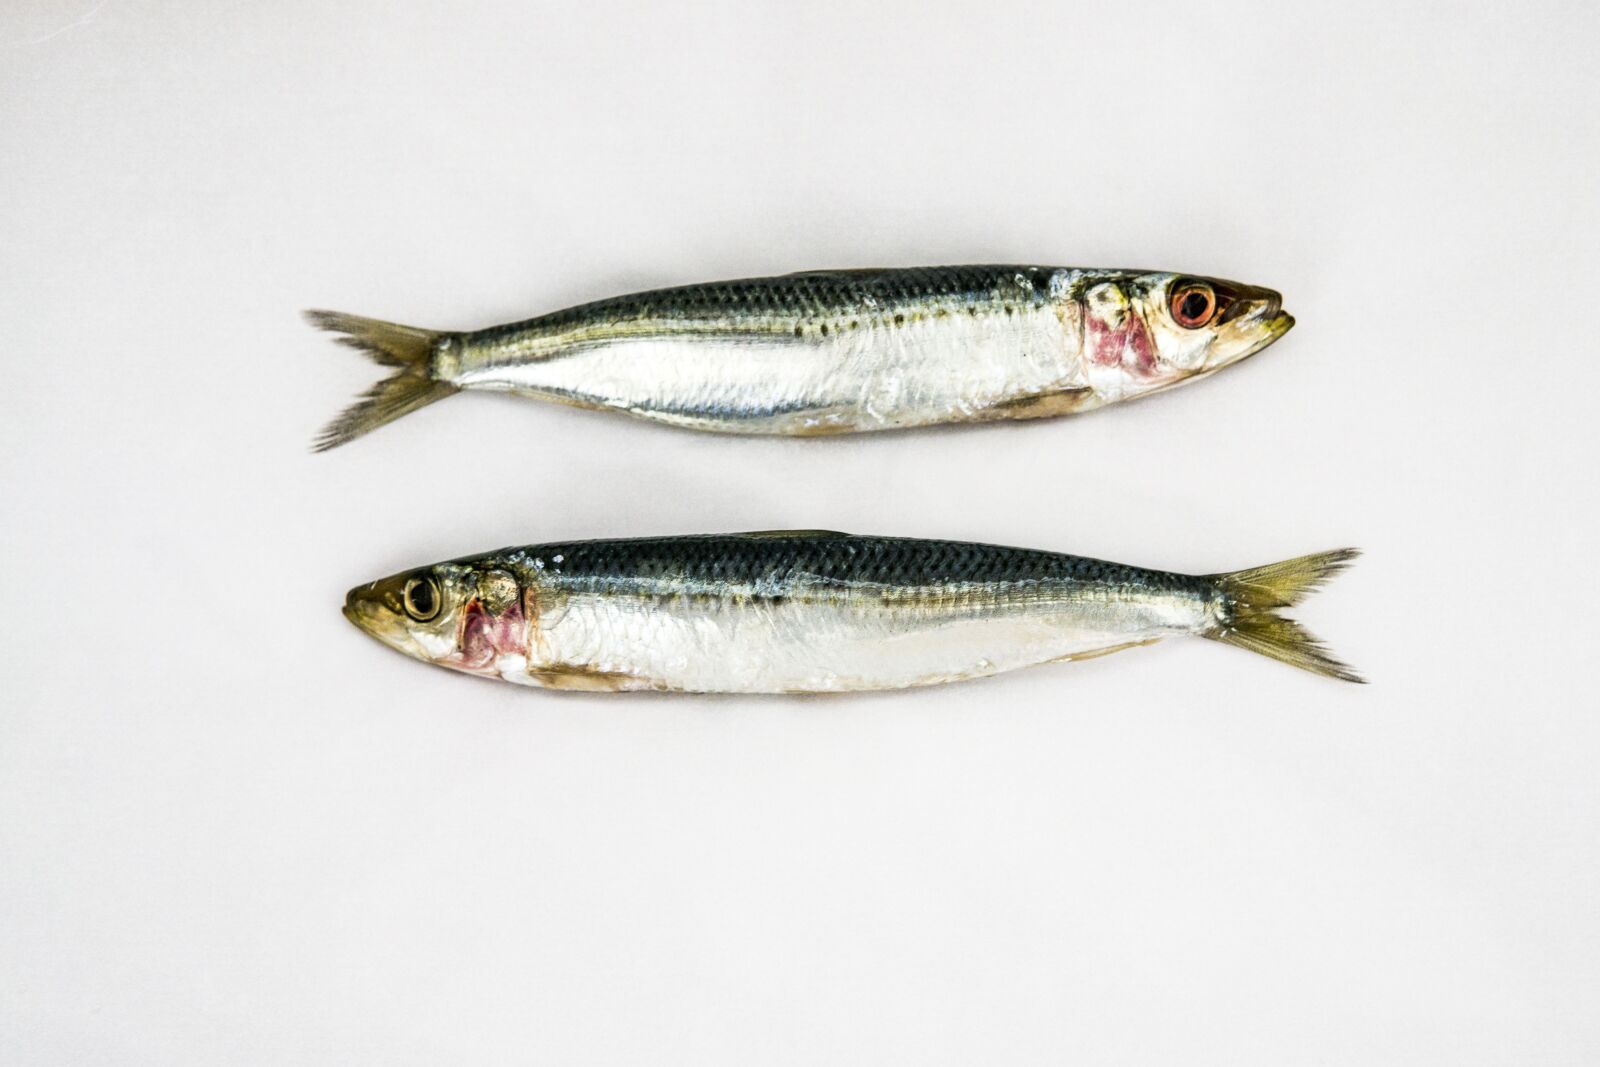 Sony a6000 sample photo. Sardines, white background, two photography